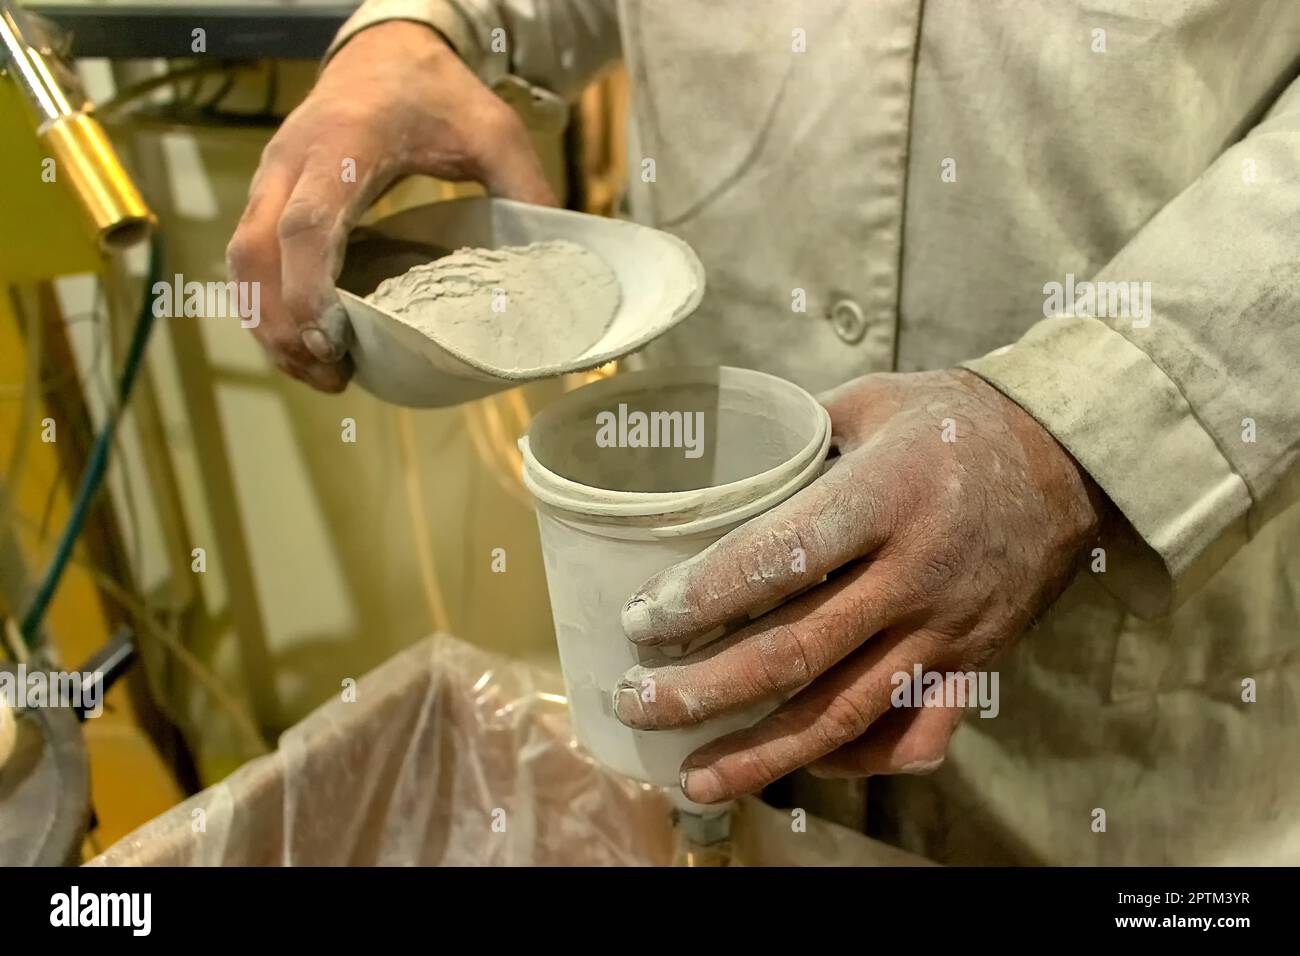 a painting shop, a male worker, manually pours white powder paint into a container, a worker is dressed in special clothes that got dirty during work. Stock Photo